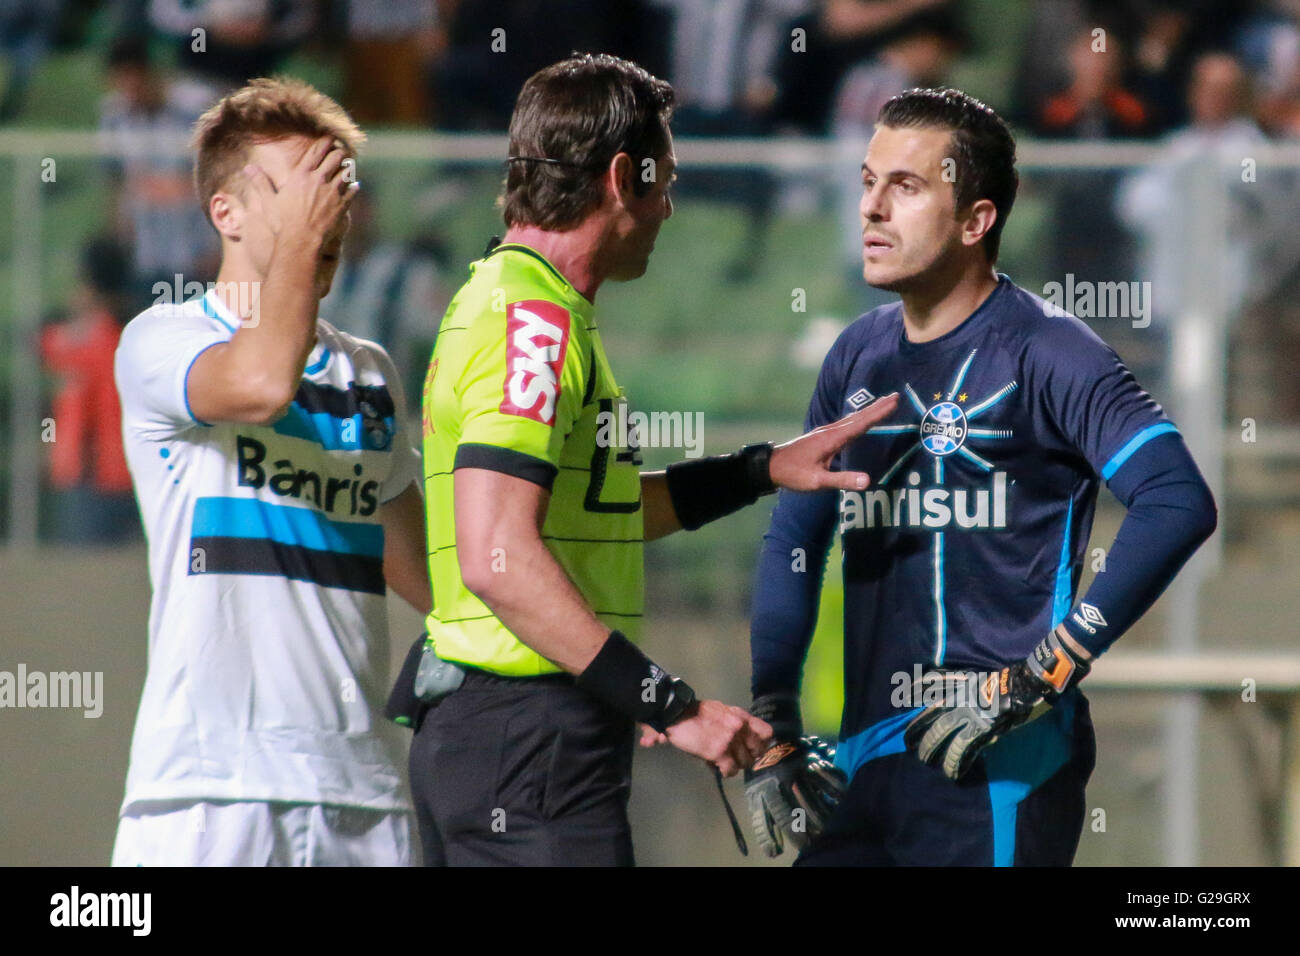 BELO HORIZONTE, MG - 05/26/2016: ATHLETIC MG X GR?MIO RS - The referee Raphael Claus urges calm the goalkeeper Gremio Marcelo Grohe for Atletico MG x Gr?mio match valid for the third round of the Championship 2016, held at the Independence Arena. (Photo: Dudu Macedo / FotoArena). Stock Photo